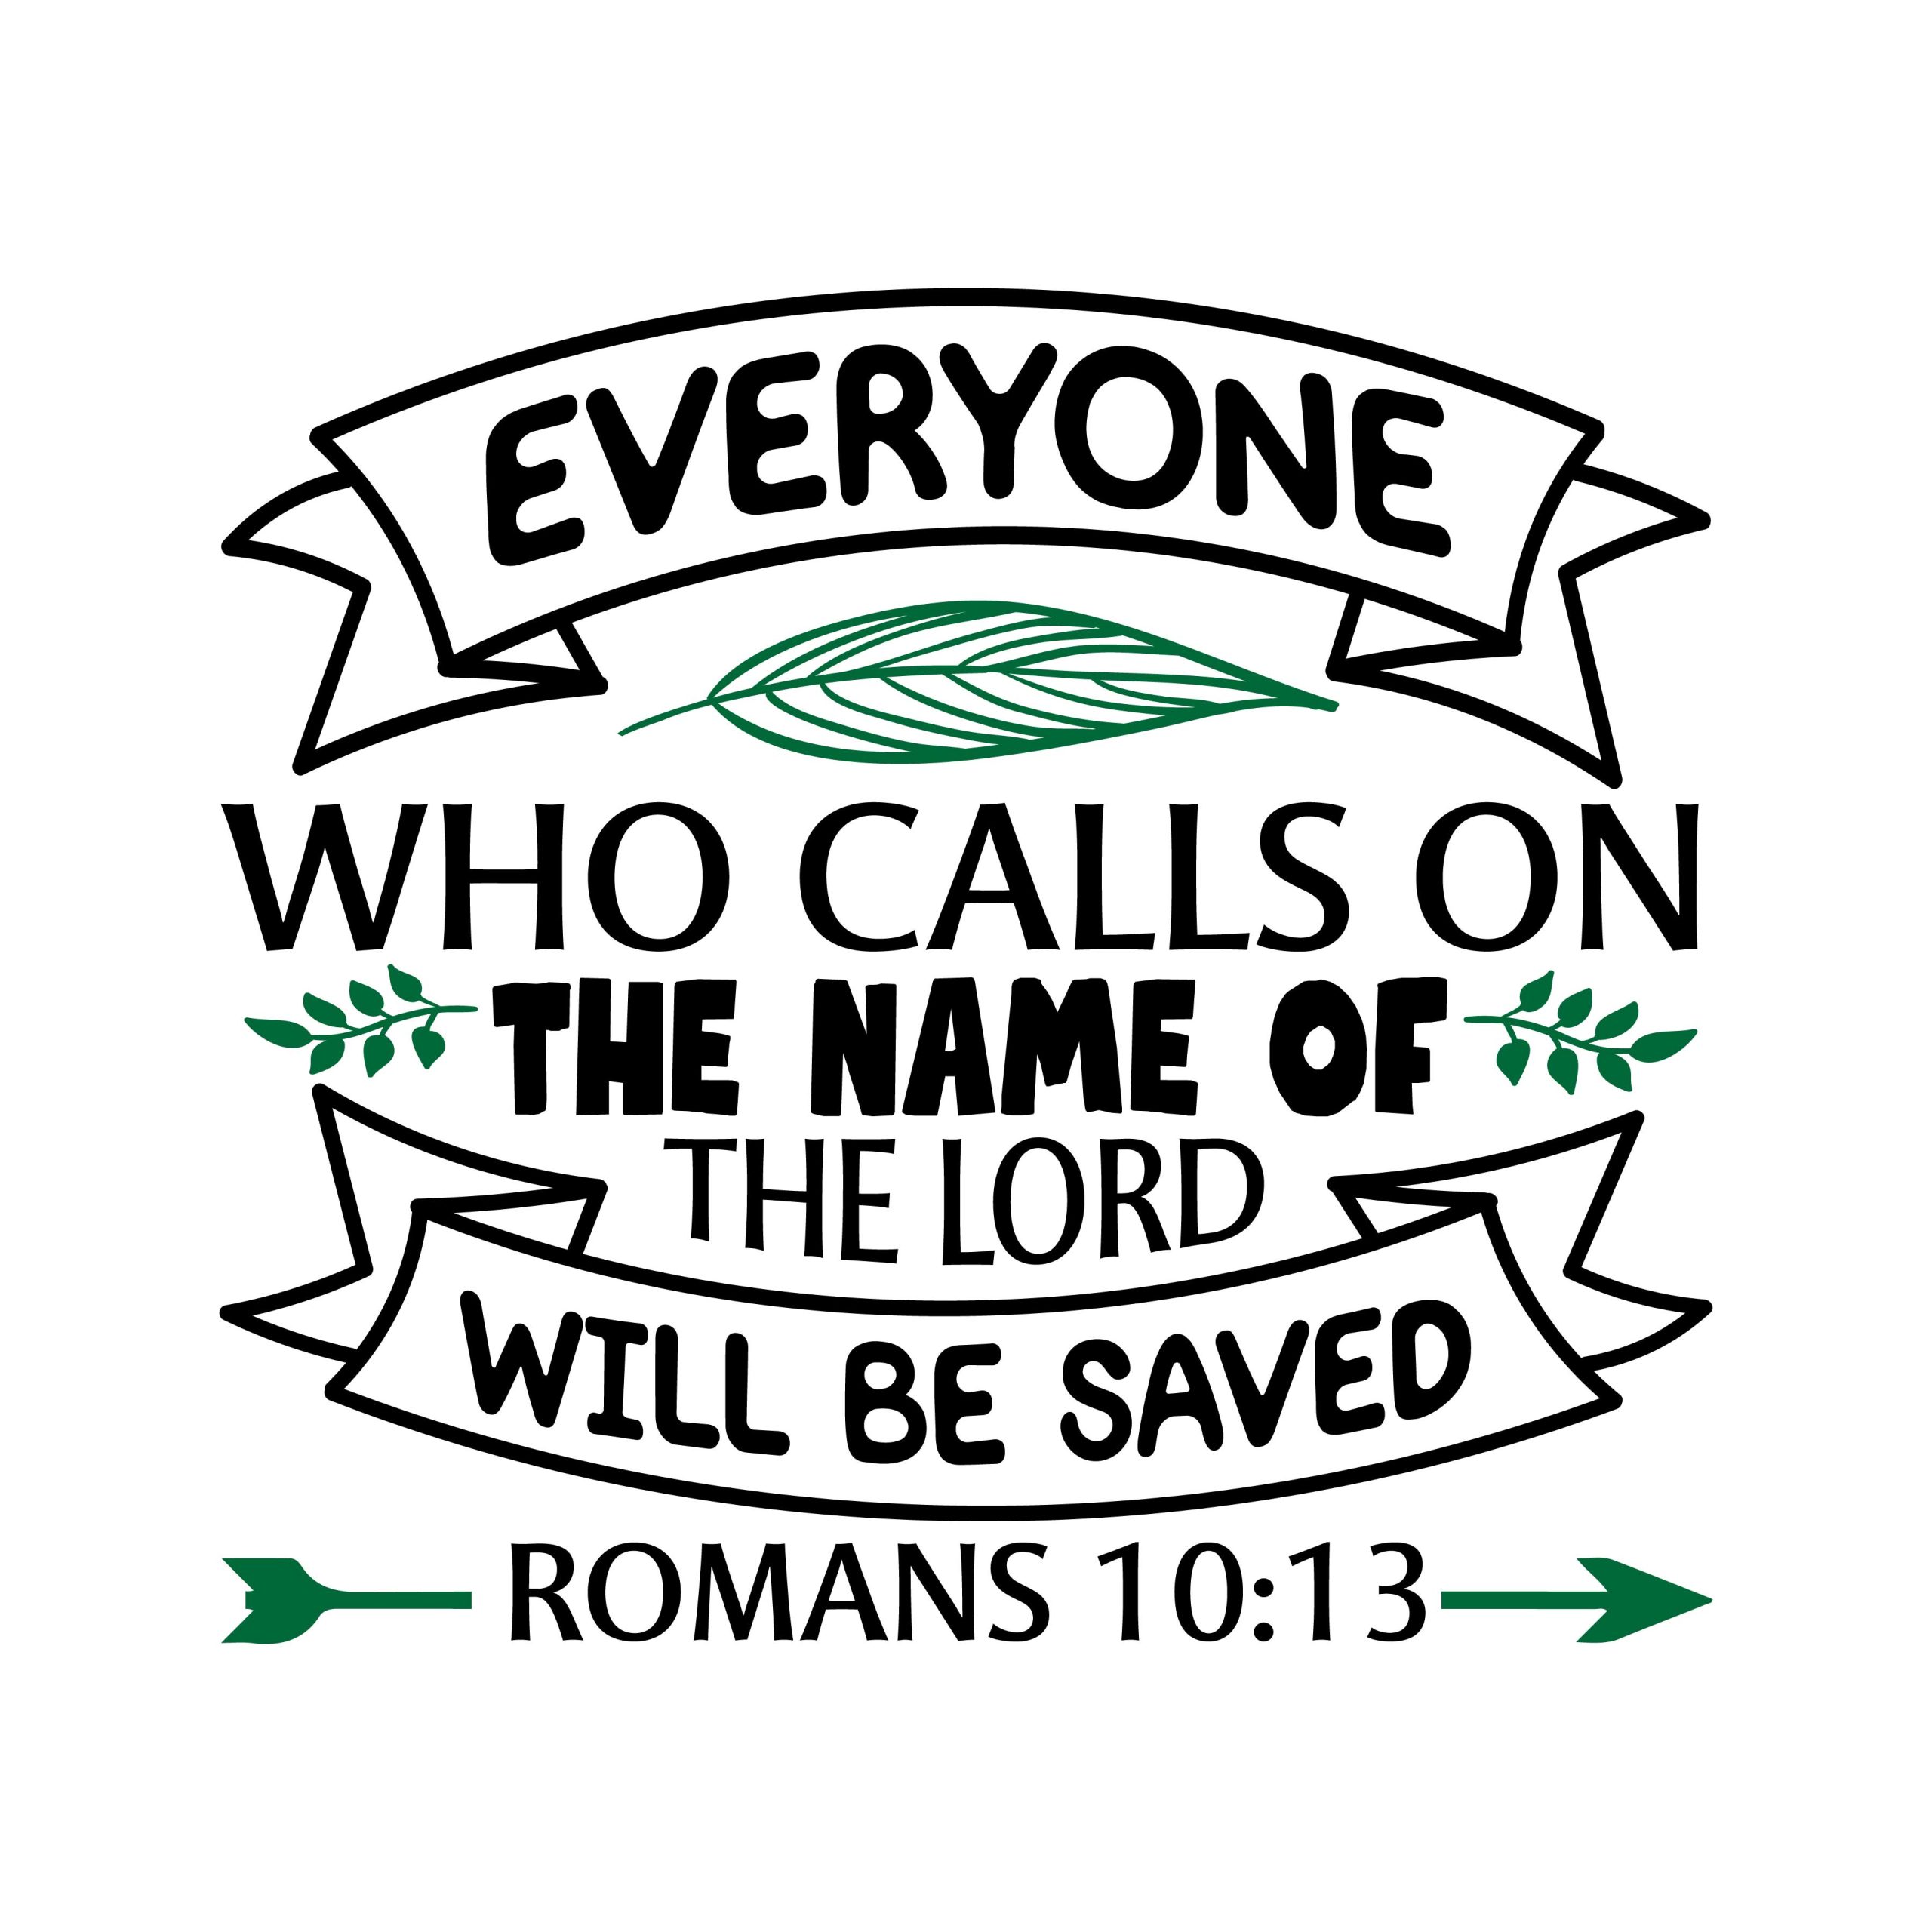 Everyone who calls on the name of the lord will be saved romans 10:13, bible verses, scripture verses, svg files, passages, sayings, cricut designs, silhouette, embroidery, bundle, free cut files, design space, vector